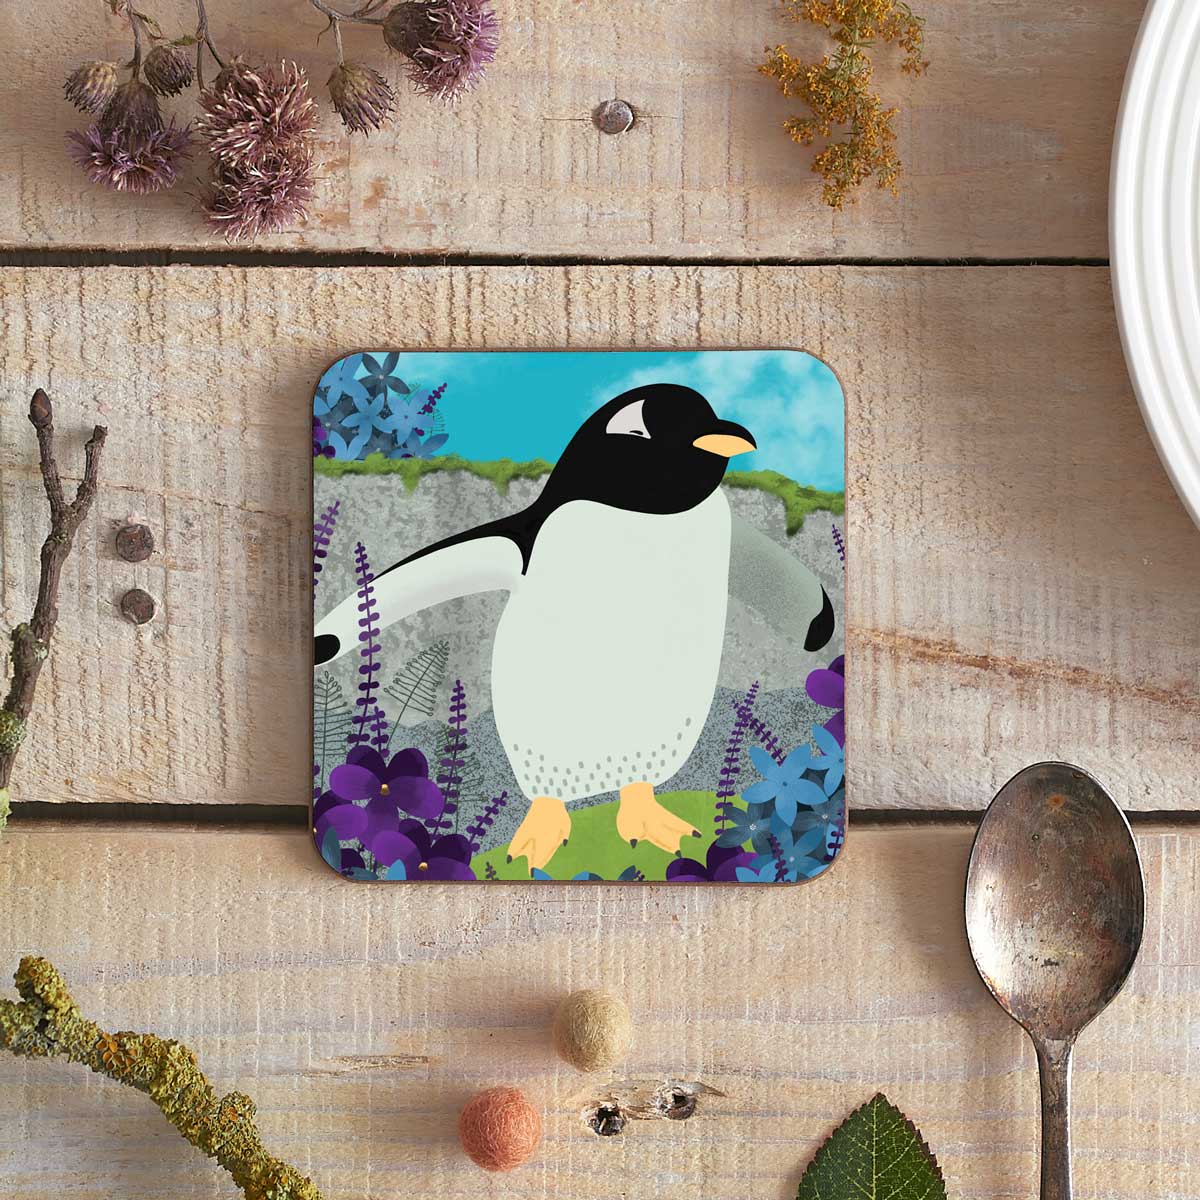 square coaster with a penguin and flowers illustration